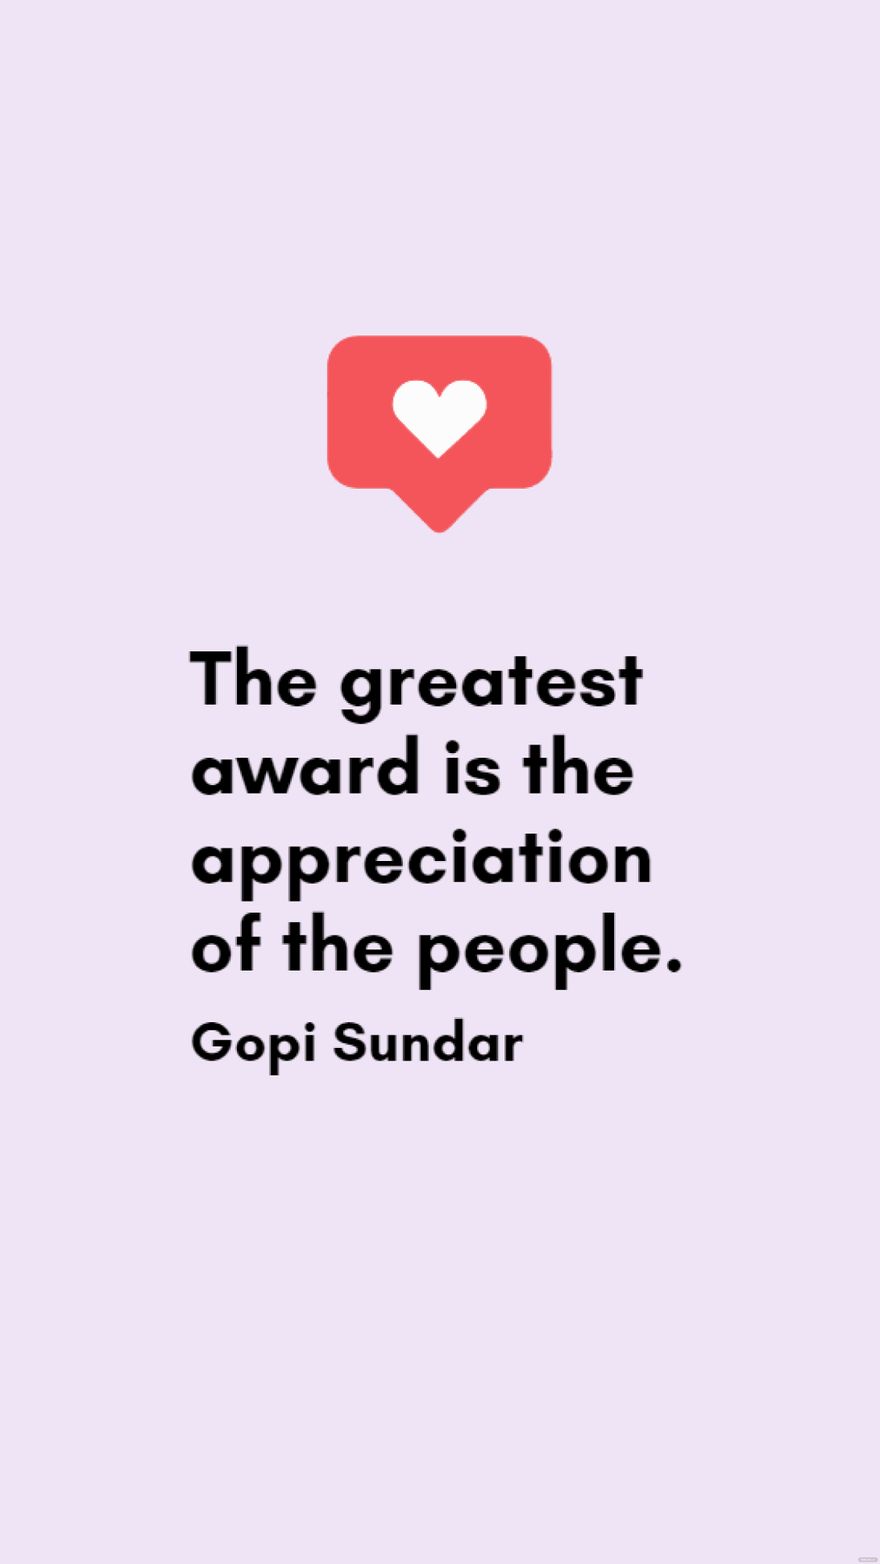 Gopi Sundar - The greatest award is the appreciation of the people.